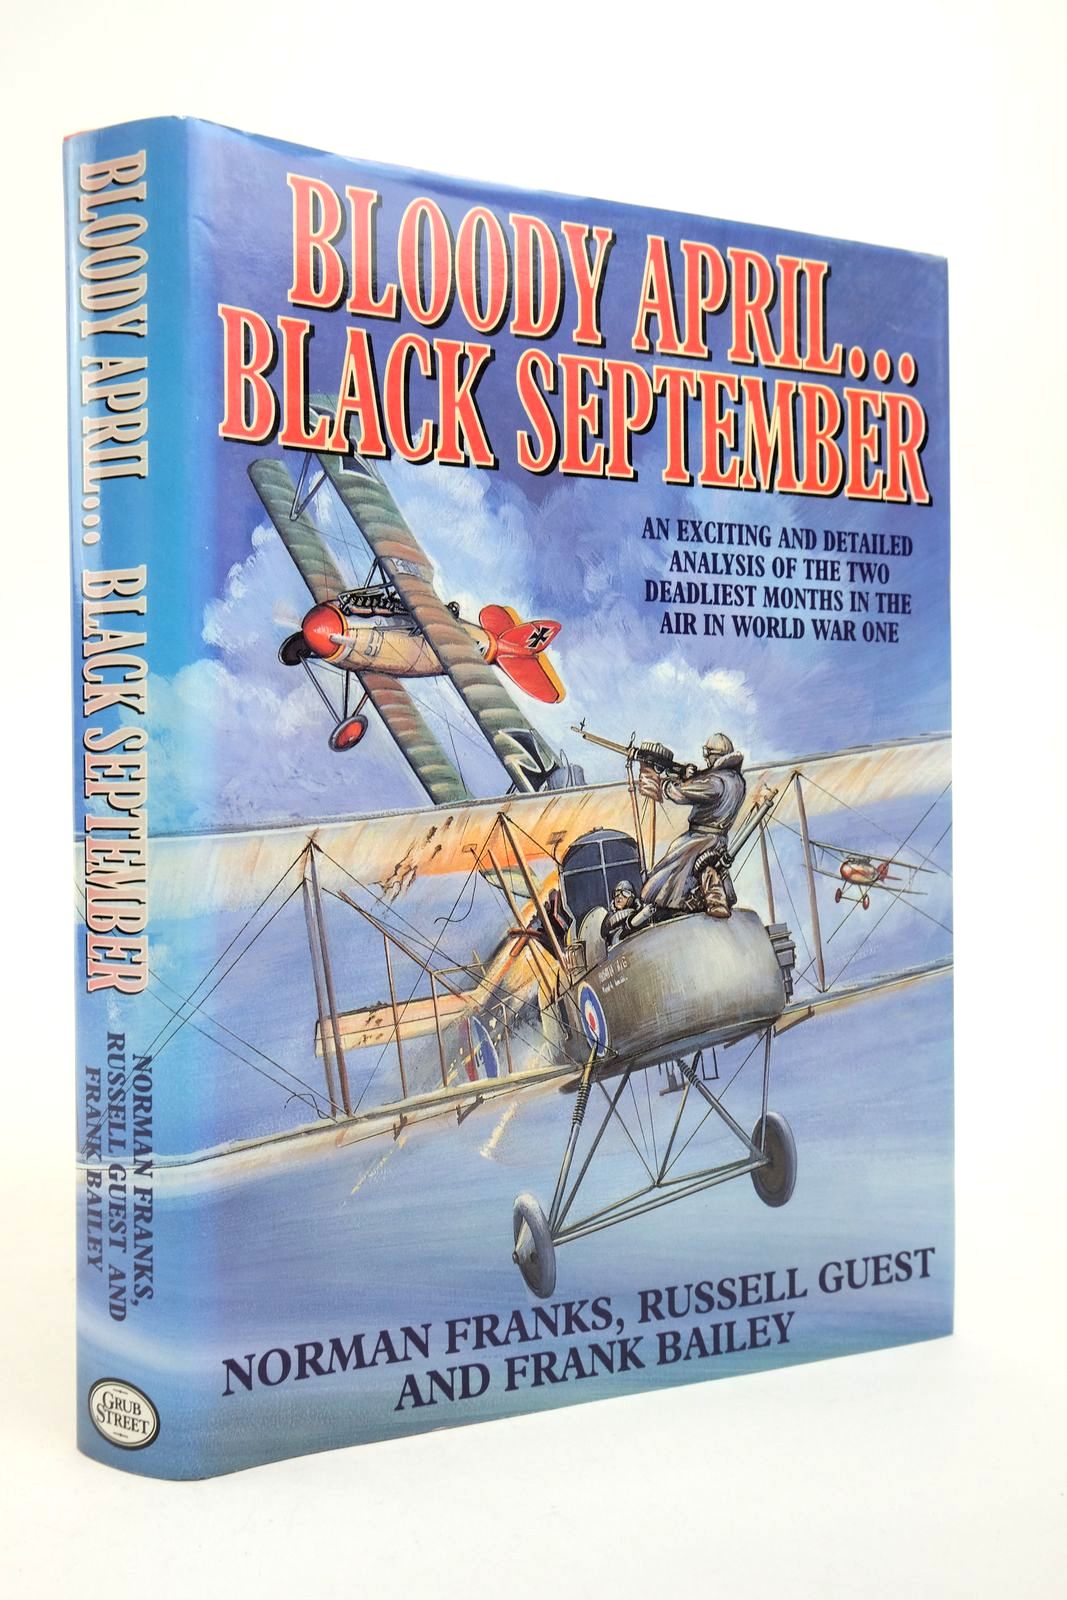 Photo of BLOODY APRIL... BLACK SEPTEMBER written by Franks, Norman L.R. Guest, Russell Bailey, Frank W. published by Grub Street (STOCK CODE: 2139807)  for sale by Stella & Rose's Books